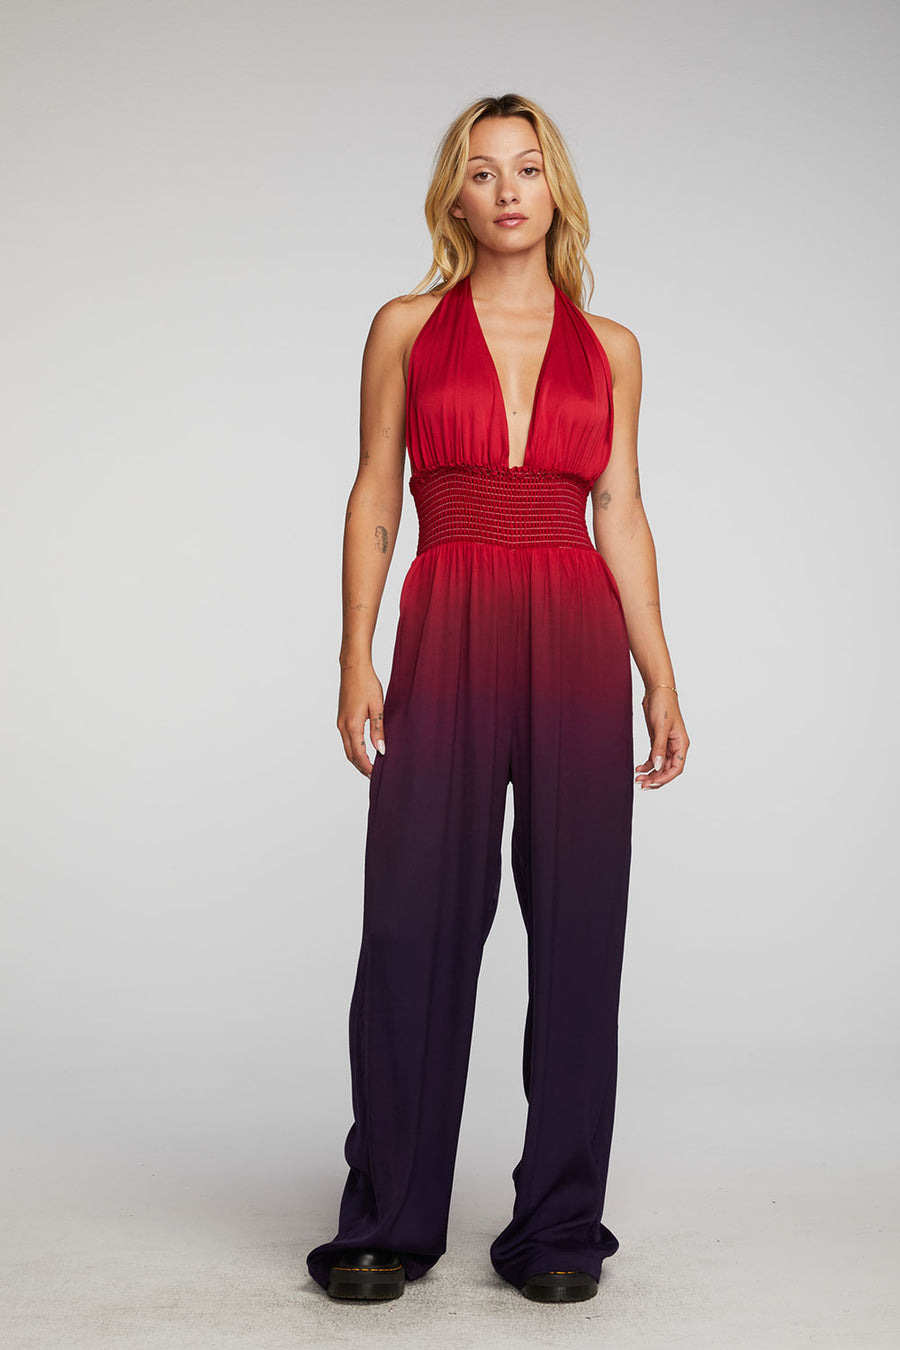 Stretch Silky Woven Halter Jumpsuit Womens chaserbrand